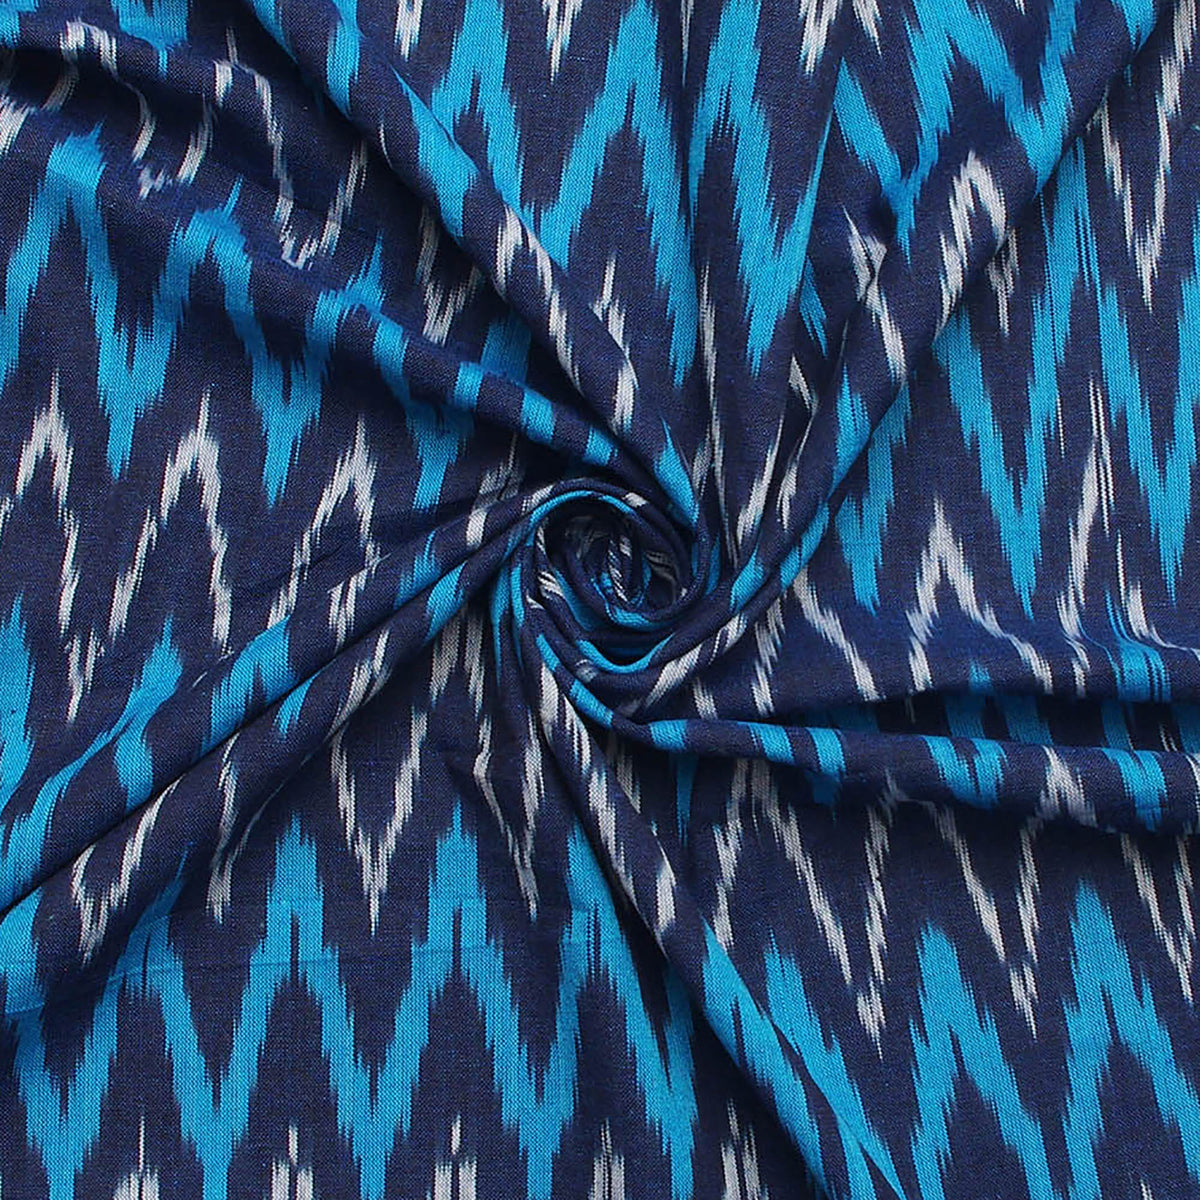 Ikat Hand Woven Cotton Fabric Design - Navy Blue With Zig Zag Weaves